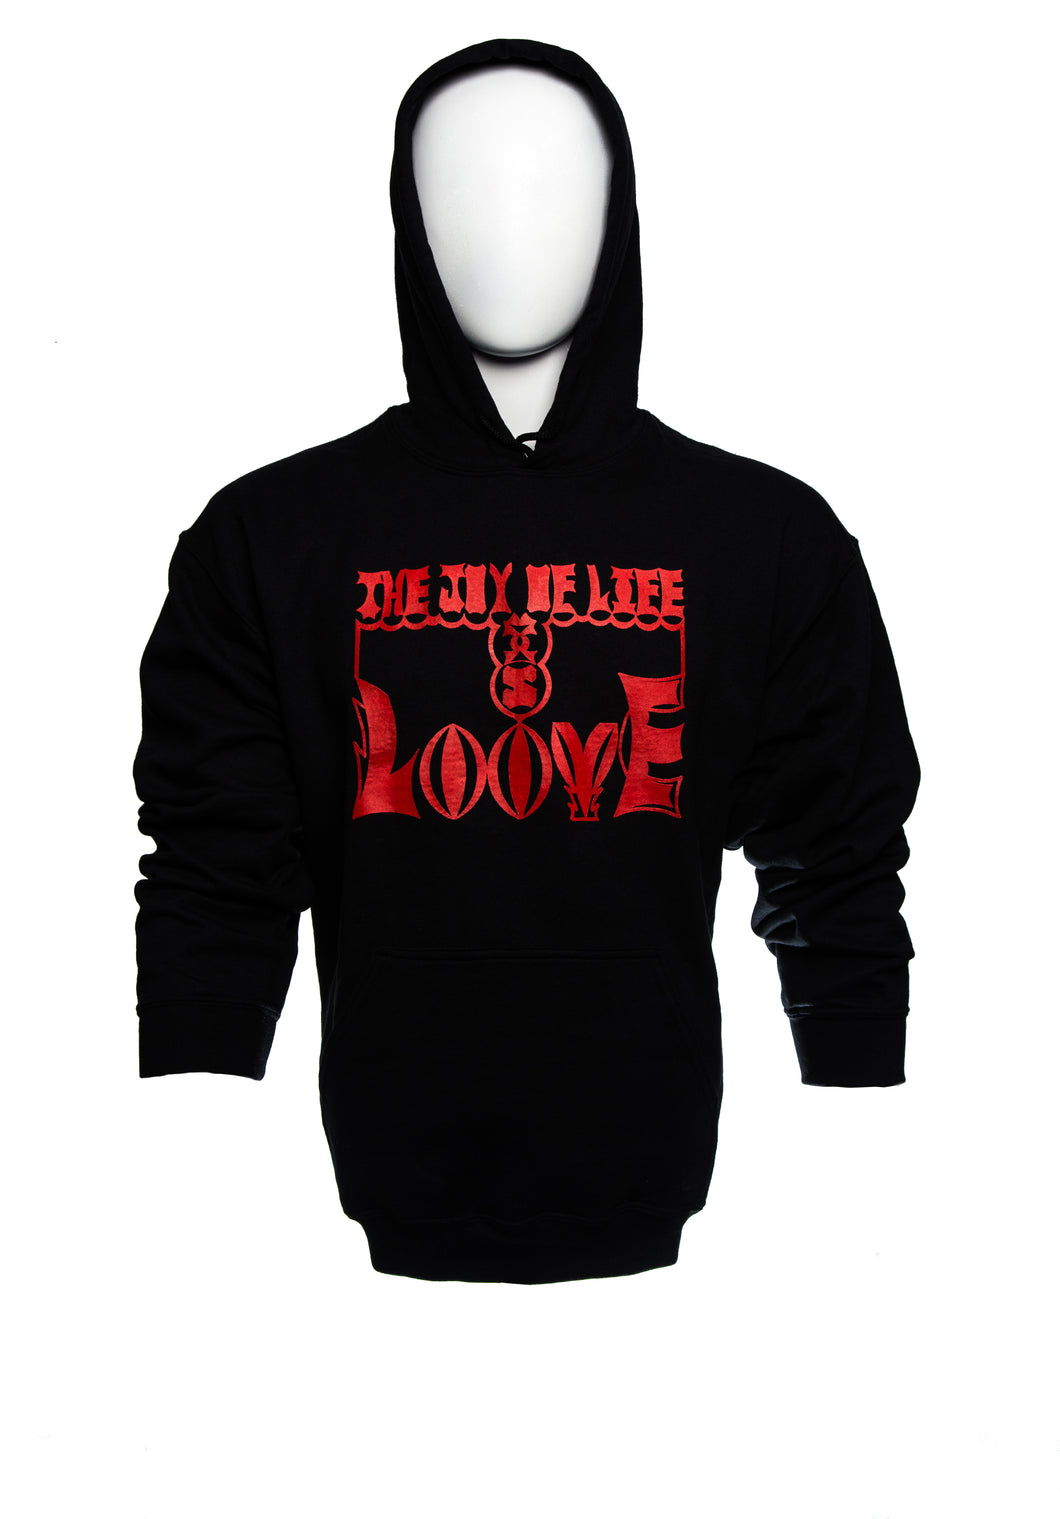 Hoody Fleece Long Sleeve Sweater, with THE JOY OF LIFE IS LOOVE (Love in 